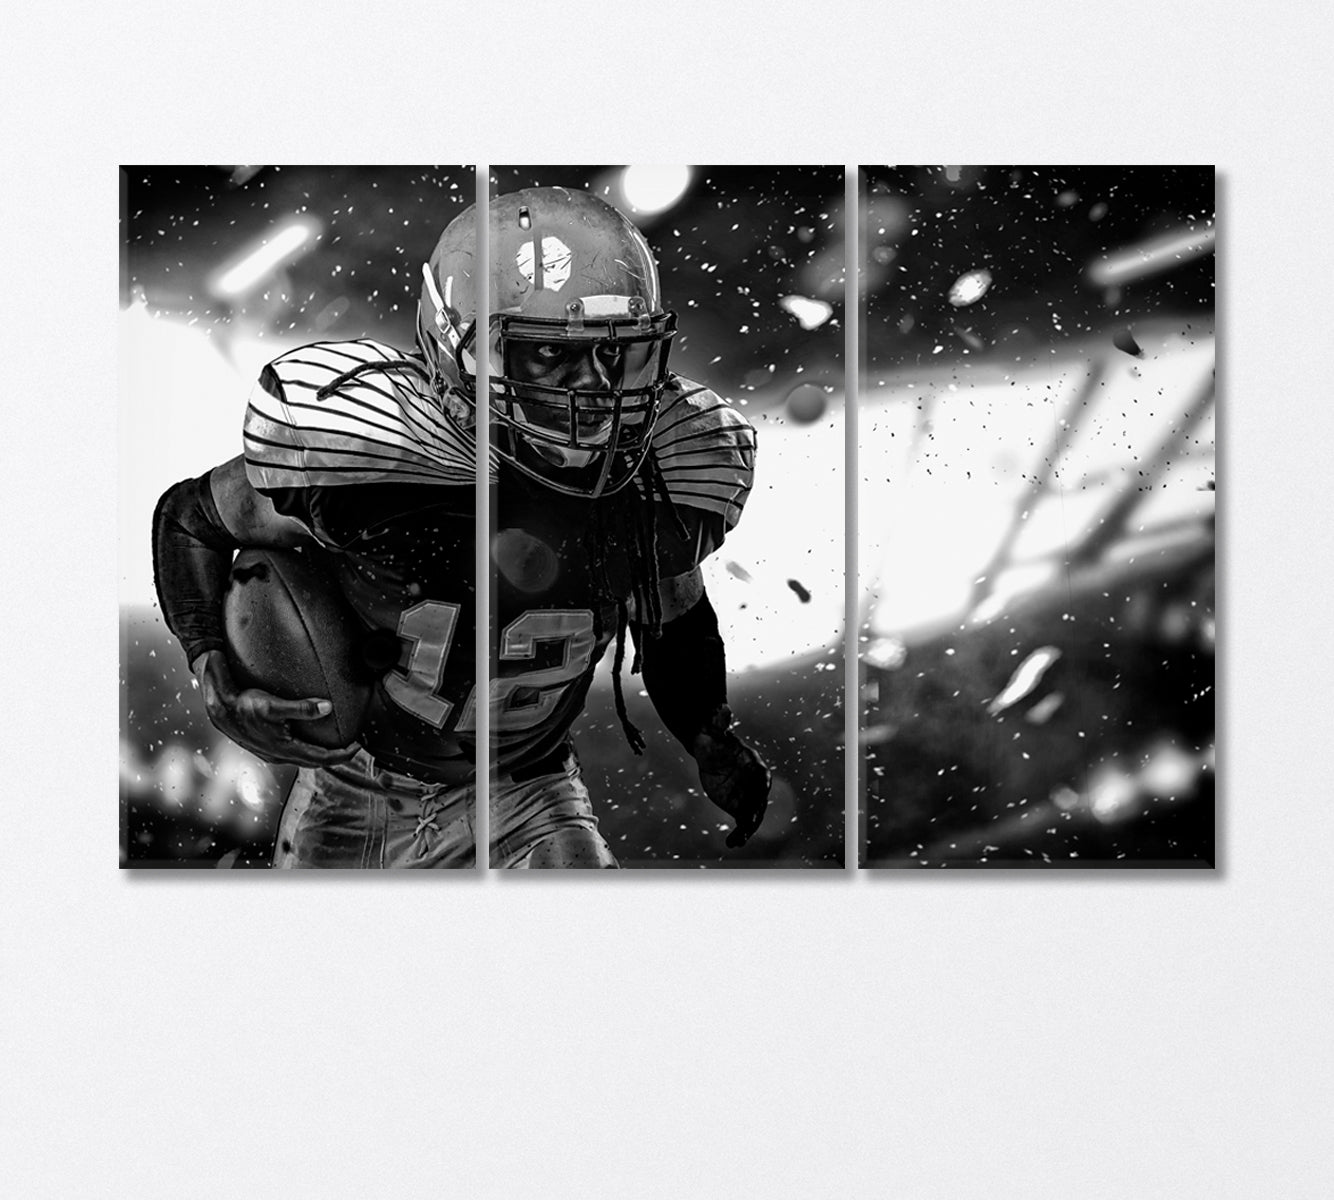 American Football Player in Black and White Canvas Print-Canvas Print-CetArt-3 Panels-36x24 inches-CetArt